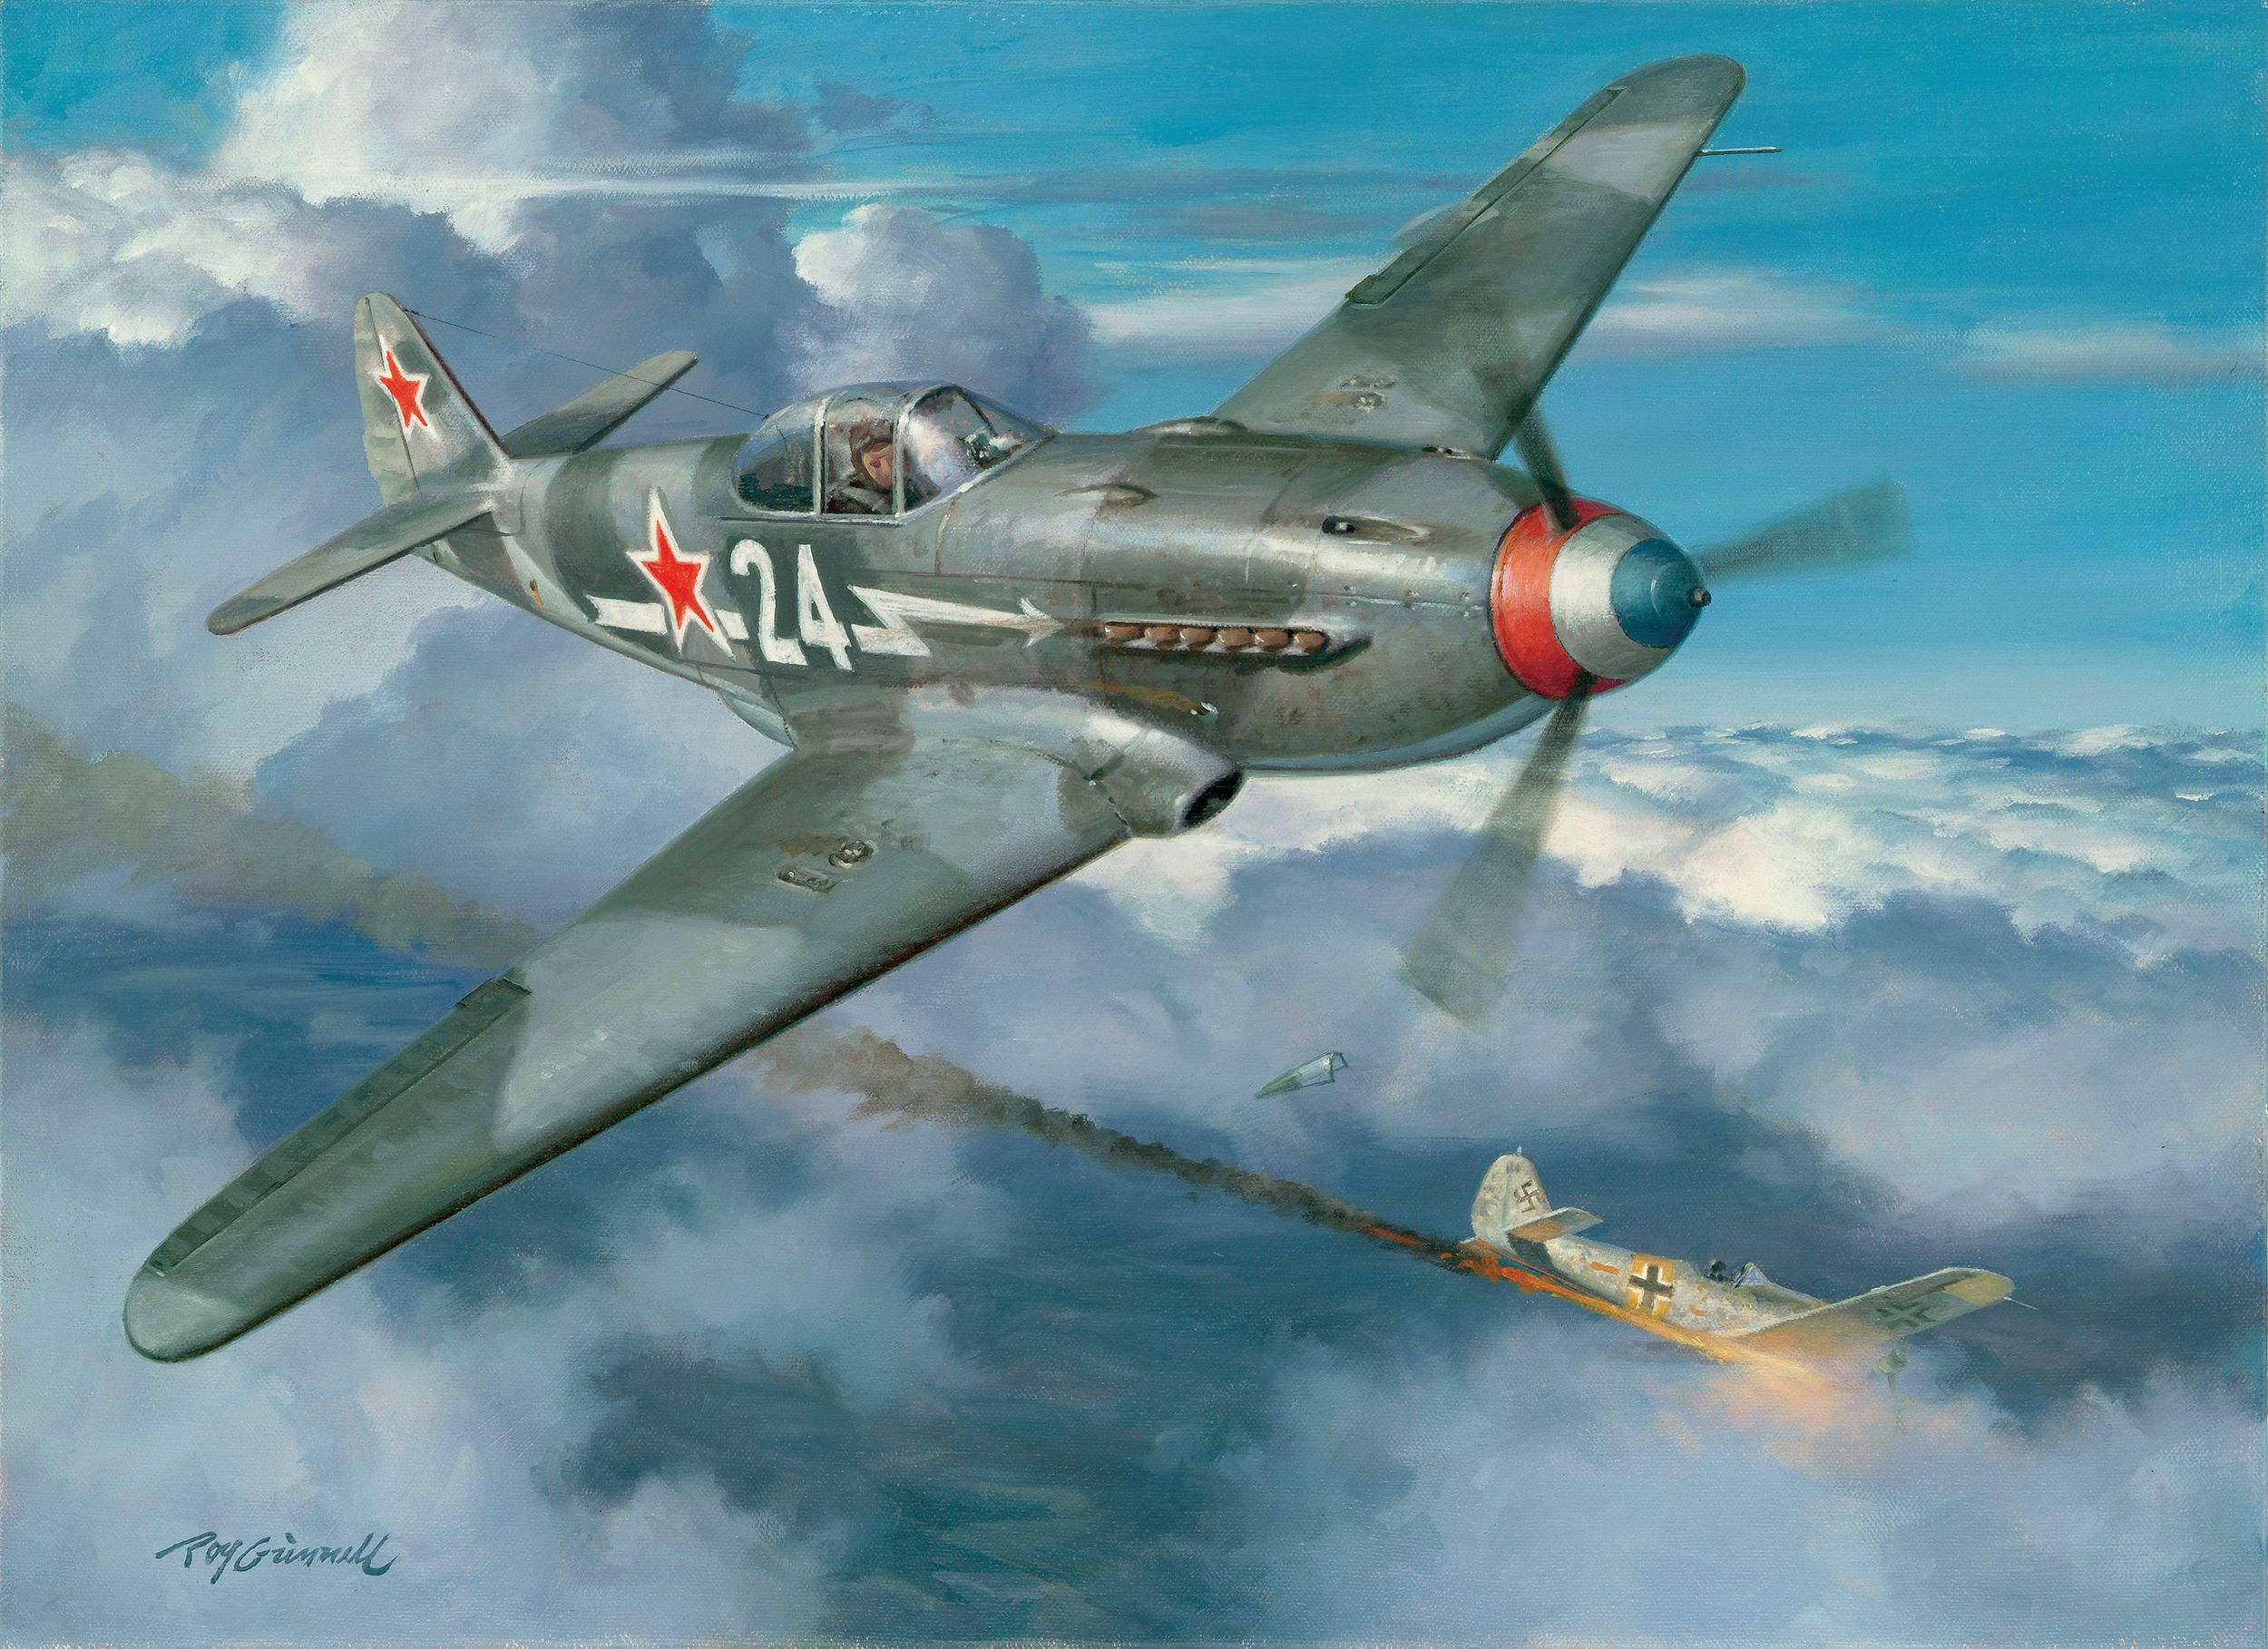 In Yak Attack, by artist Roy Grinnell, Roland de la Poype shoots down a German FW-190 over Russia on October 23, 1944. This was Poype’s 15th aerial victory, and the 182nd for the Normandie-Niemen Squadron.